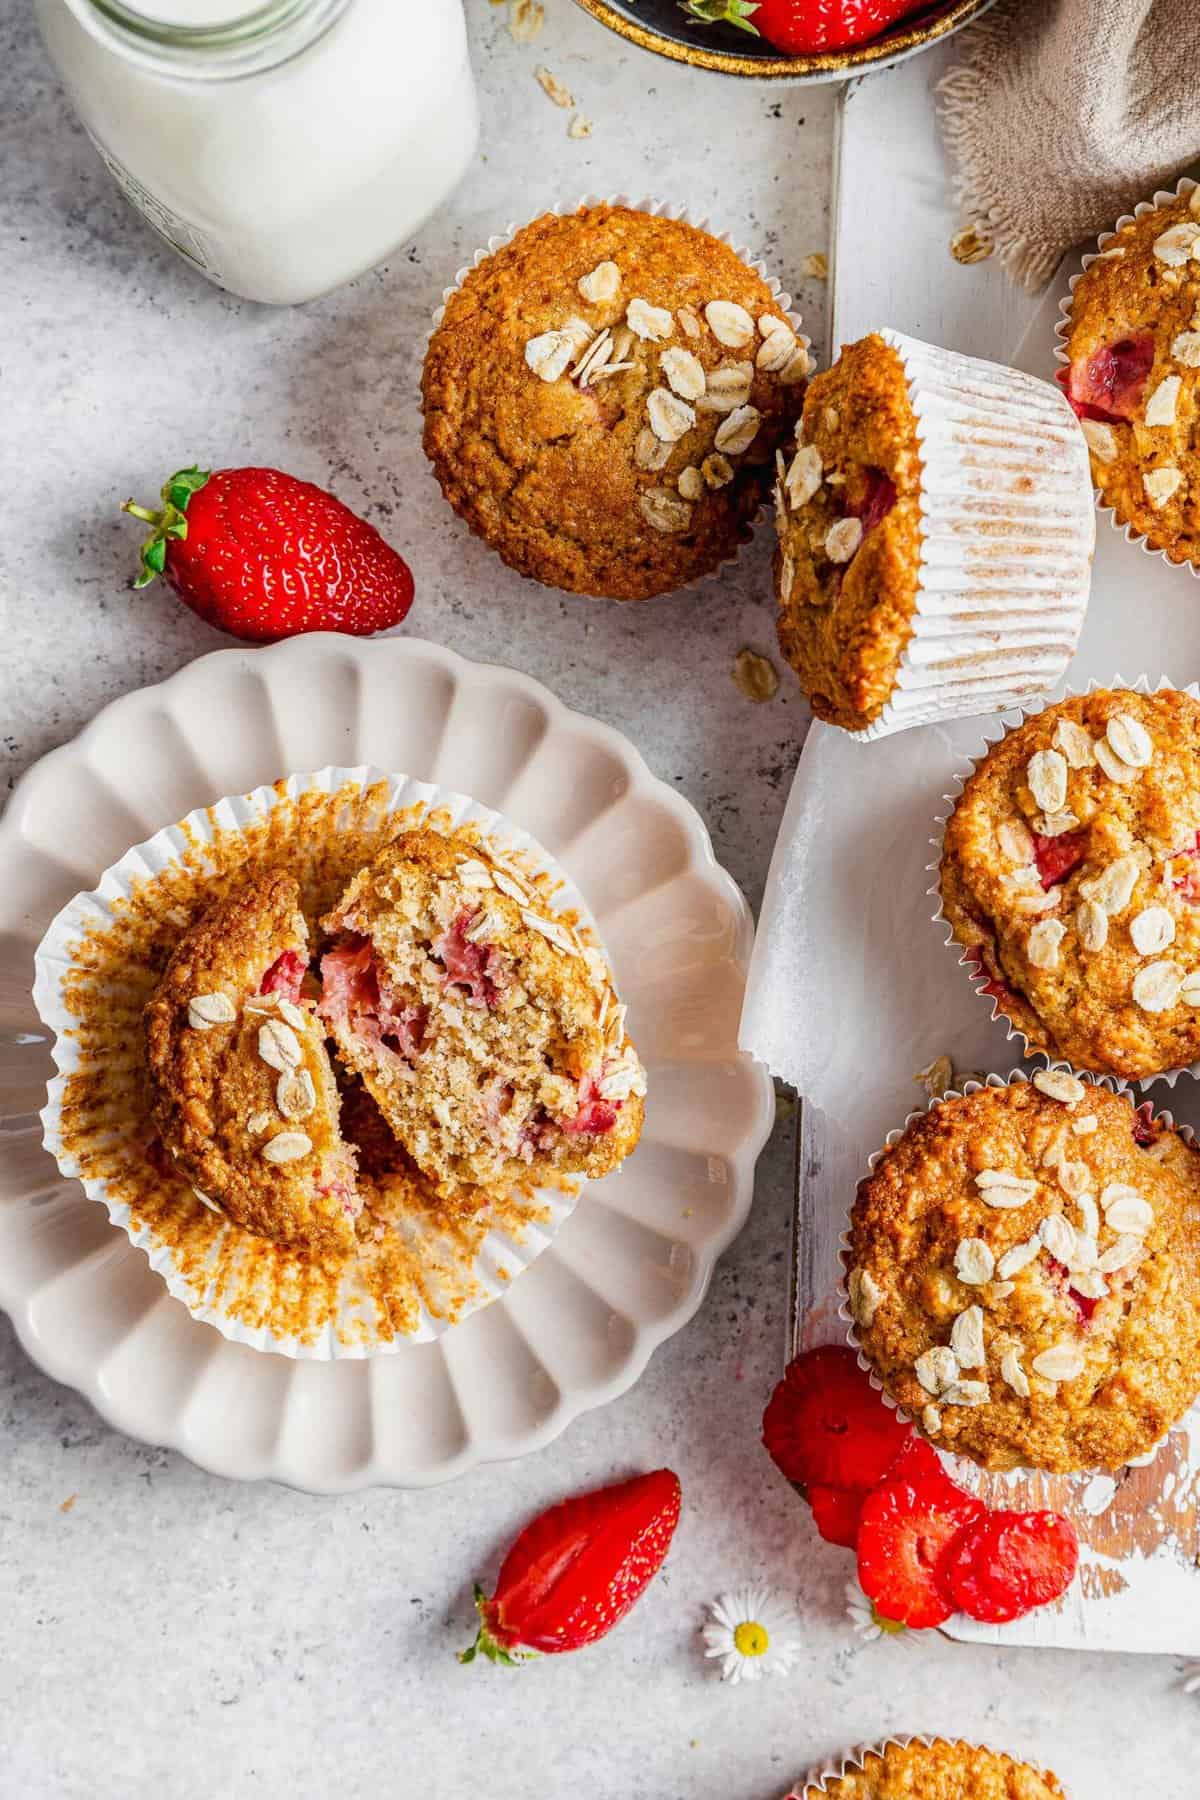 Overhead view of strawberry oatmeal muffins on plate and board